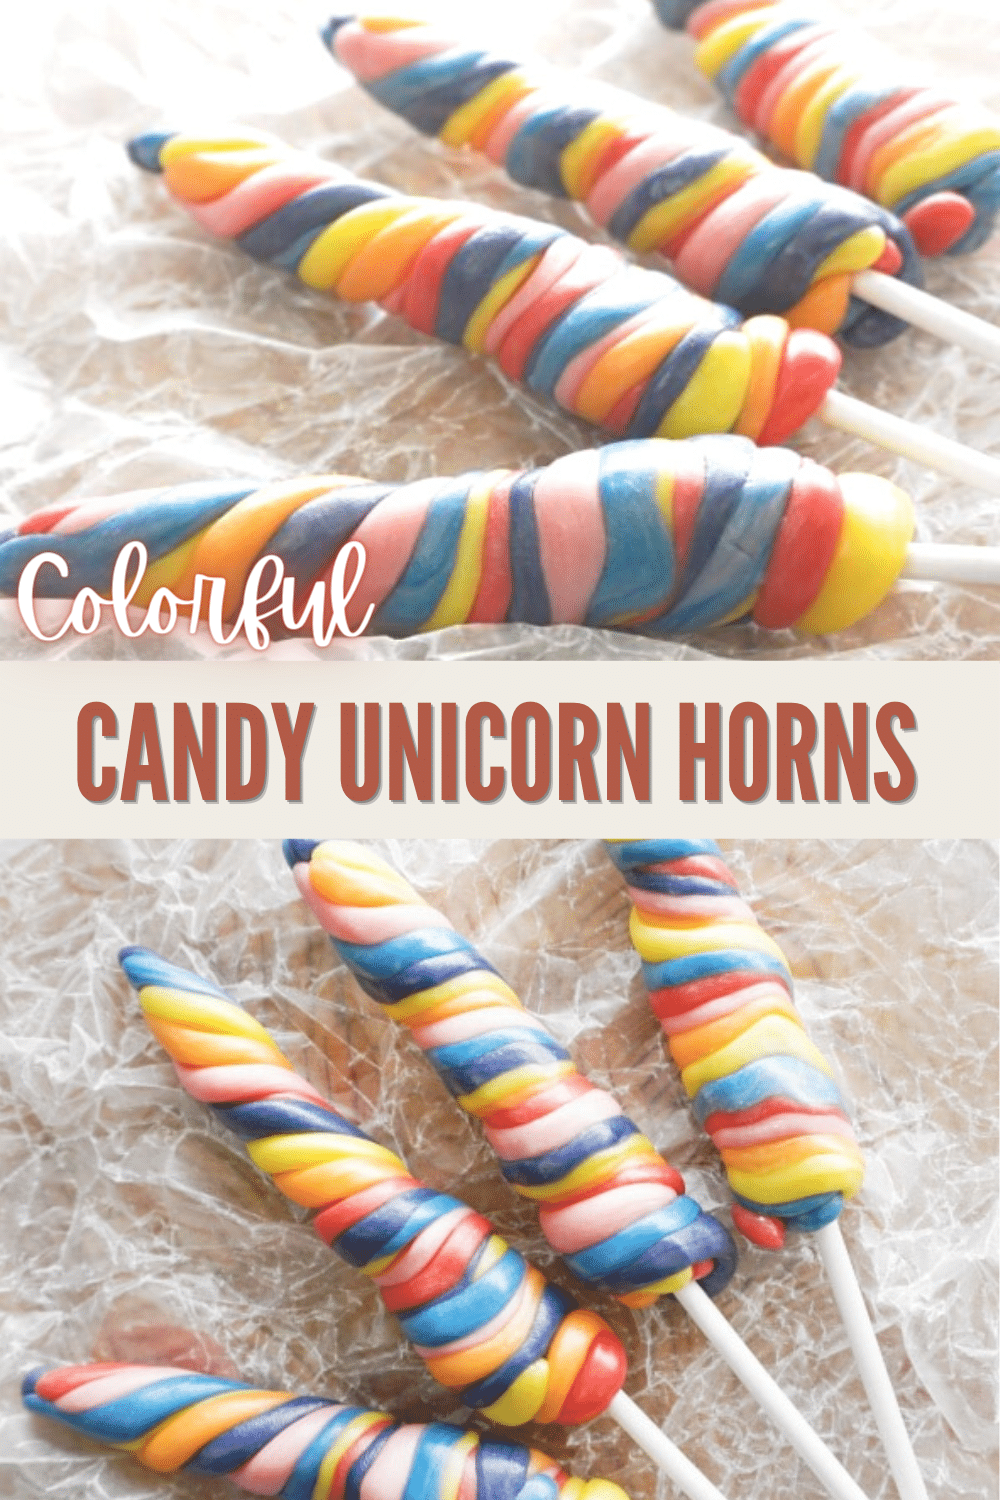 Learn how to make Candy Unicorn Horns with Starburst candy. This is a fun and easy dessert treat that is colorful and perfect for unicorn lovers. #unicorns #starburst #unicorntreats #candy via @wondermomwannab